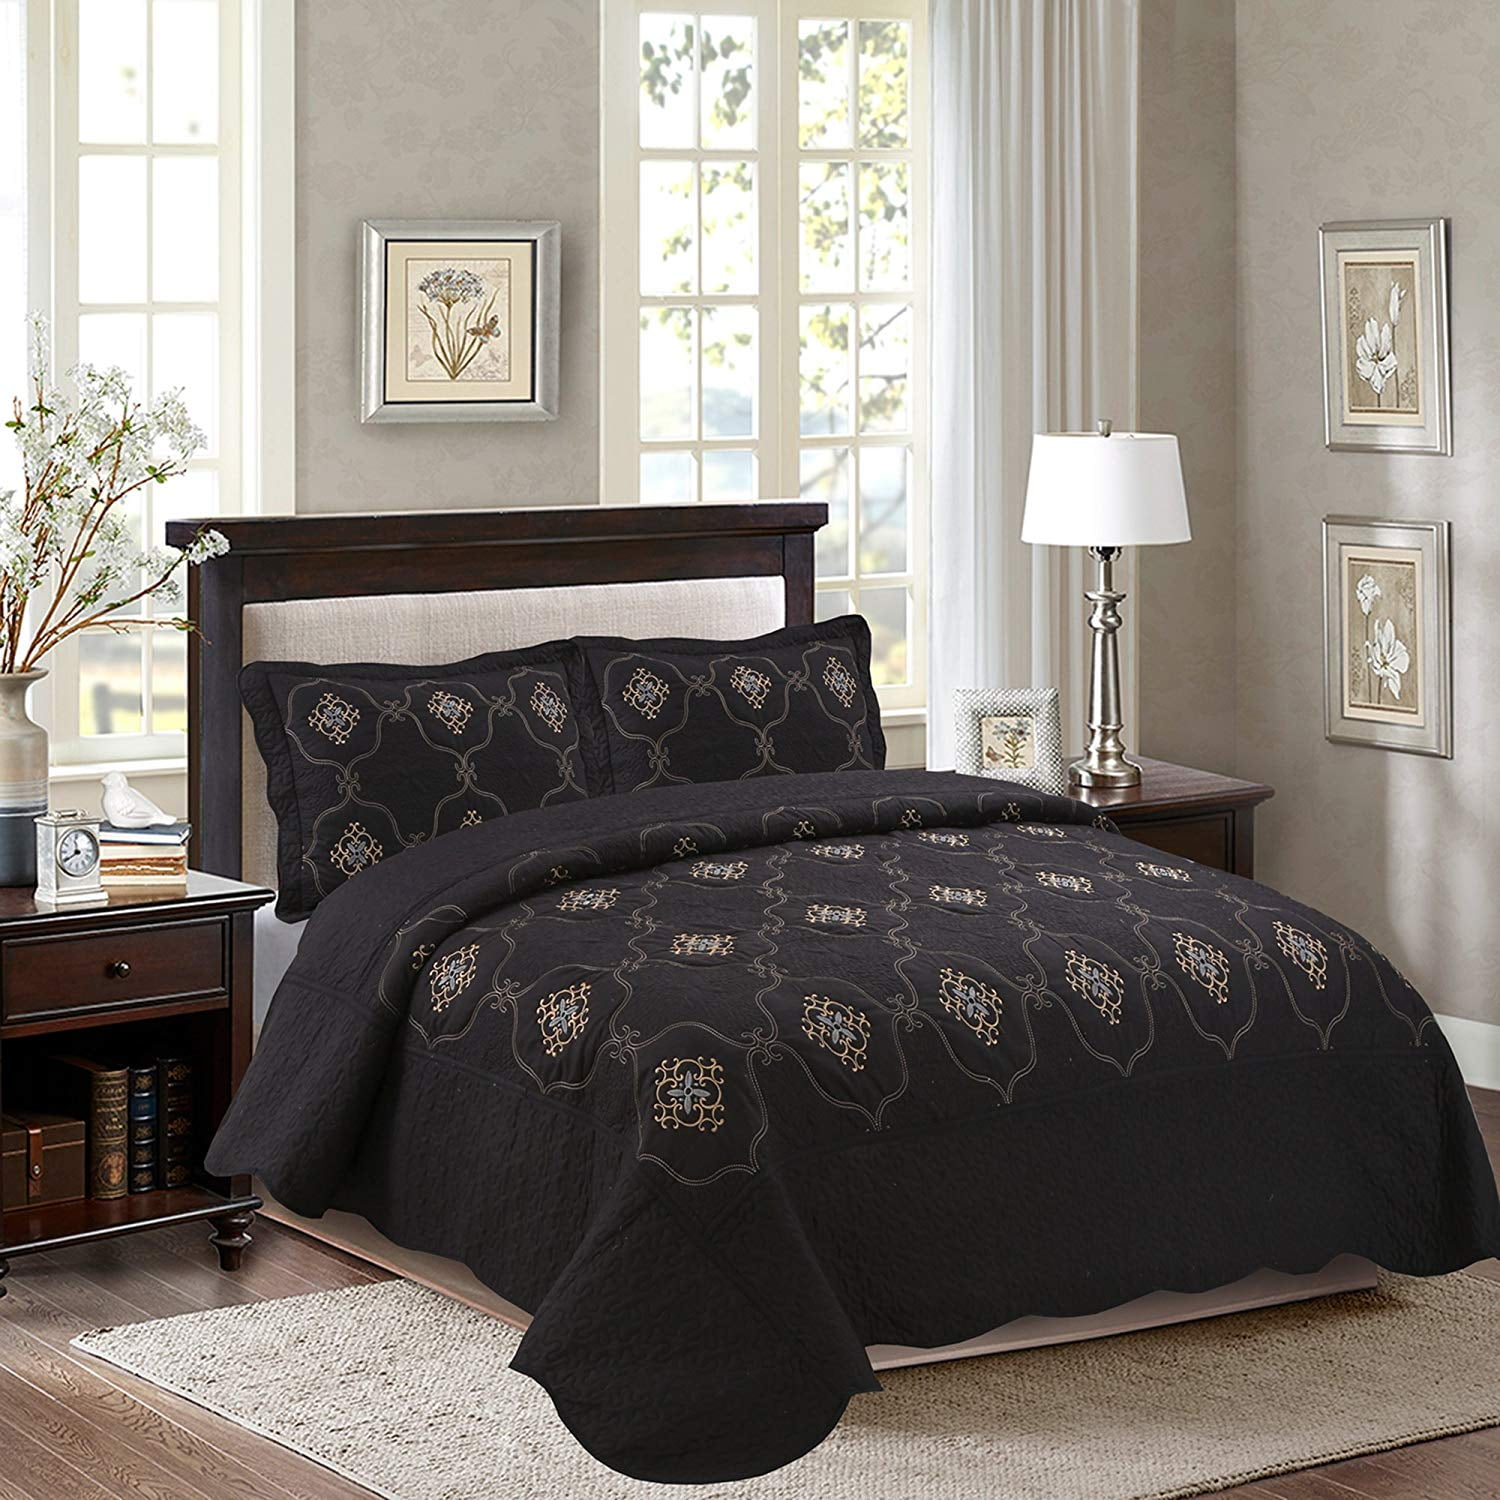 Marcielo 3 Piece Fully Quilted, Silver And Black King Size Bedding